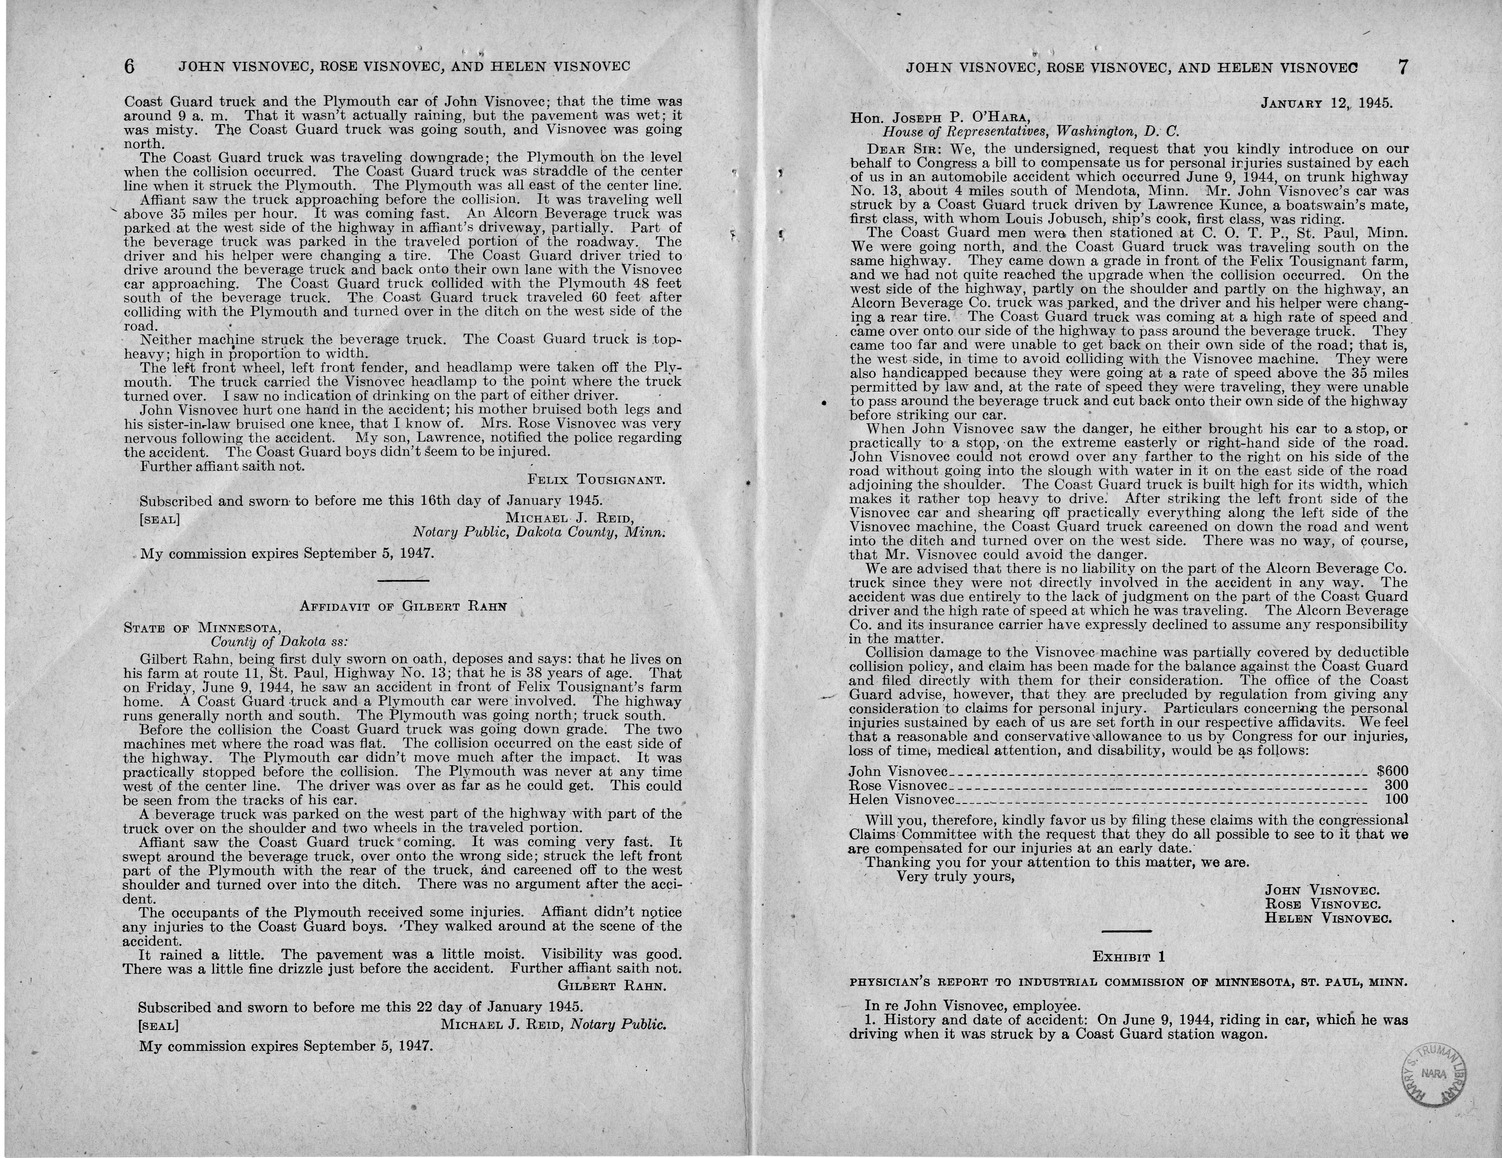 Memorandum from Frederick J. Bailey to M. C. Latta, H.R. 2028, For the Relief of John Visnovec, Rose Visnovec, and Helen Visnovec, with Attachments